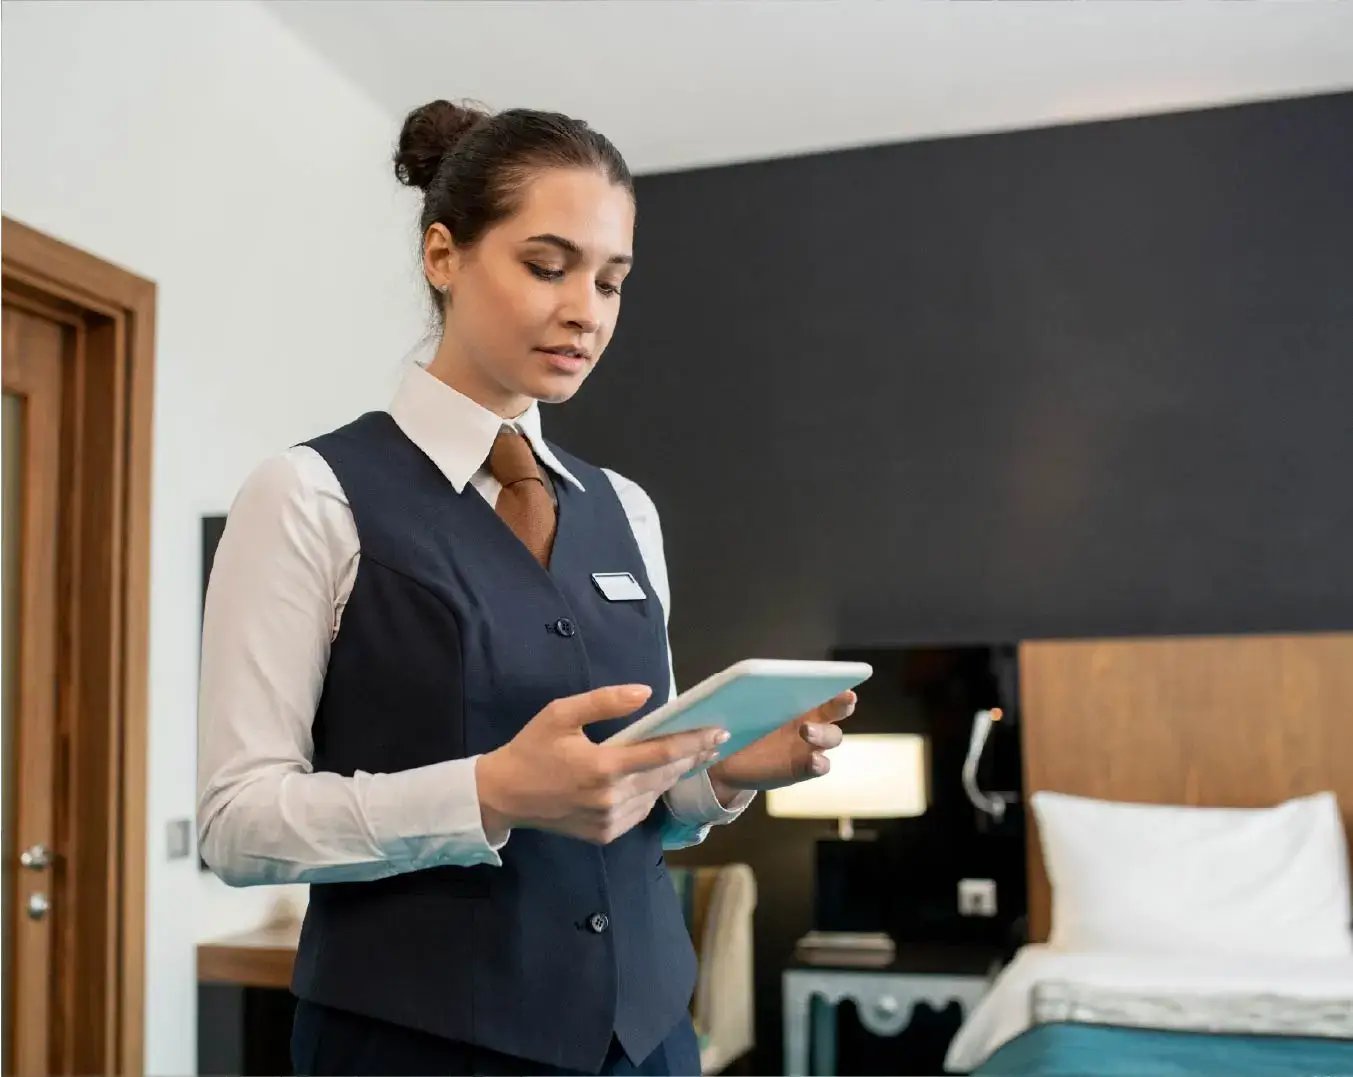 paperless hotels using pms